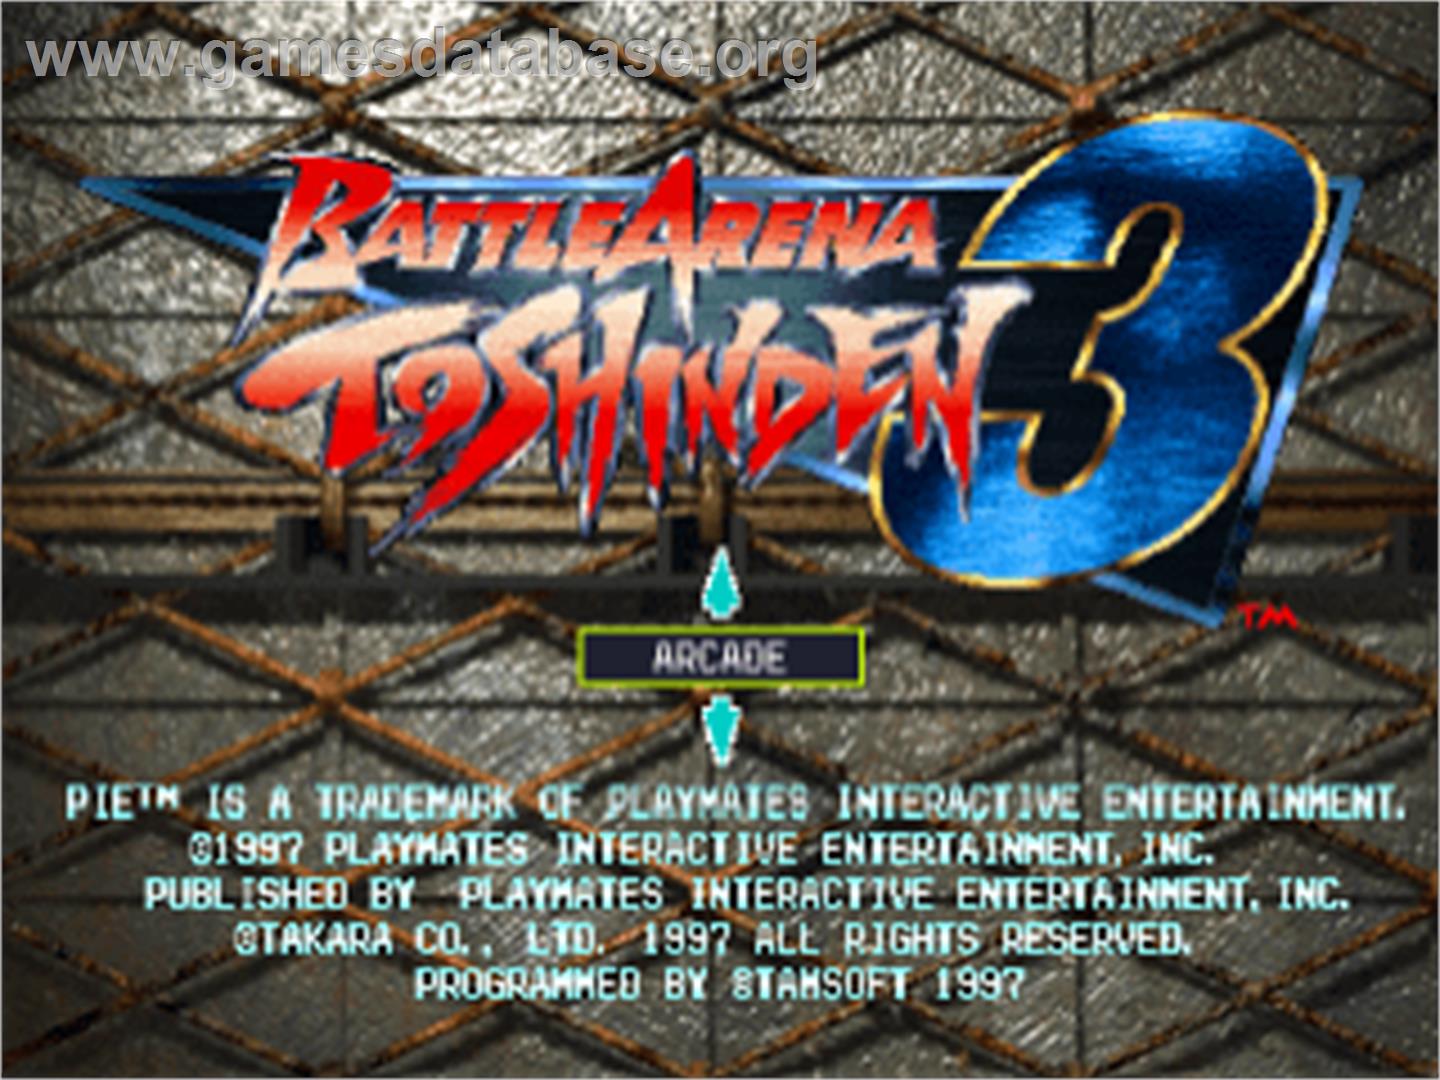 Battle Arena Toshinden 3 - Sony Playstation - Artwork - Title Screen